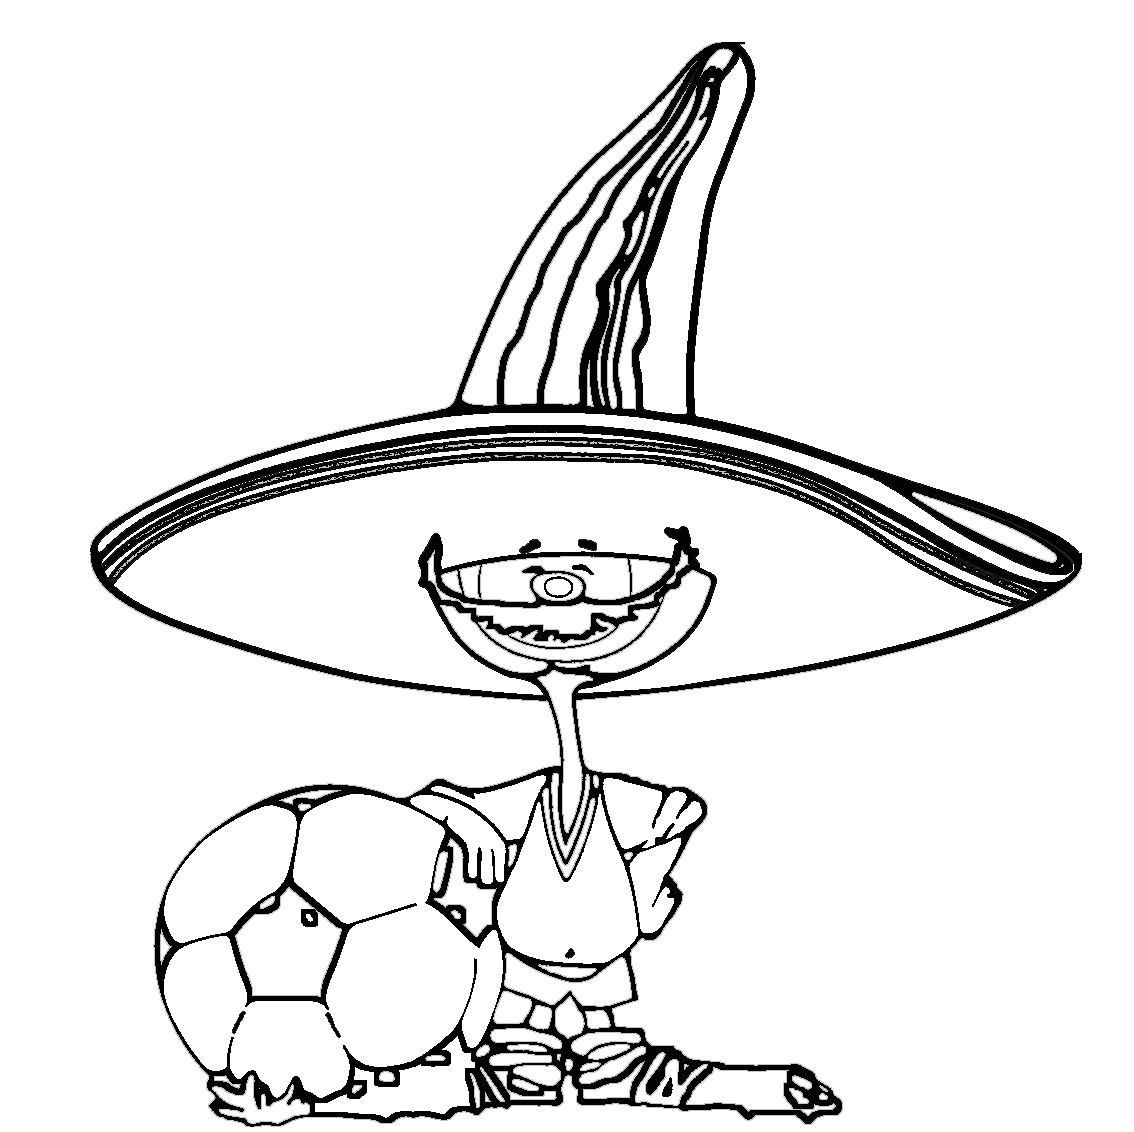 Pique Mascot World Cup Mexico 1986 Coloring Page